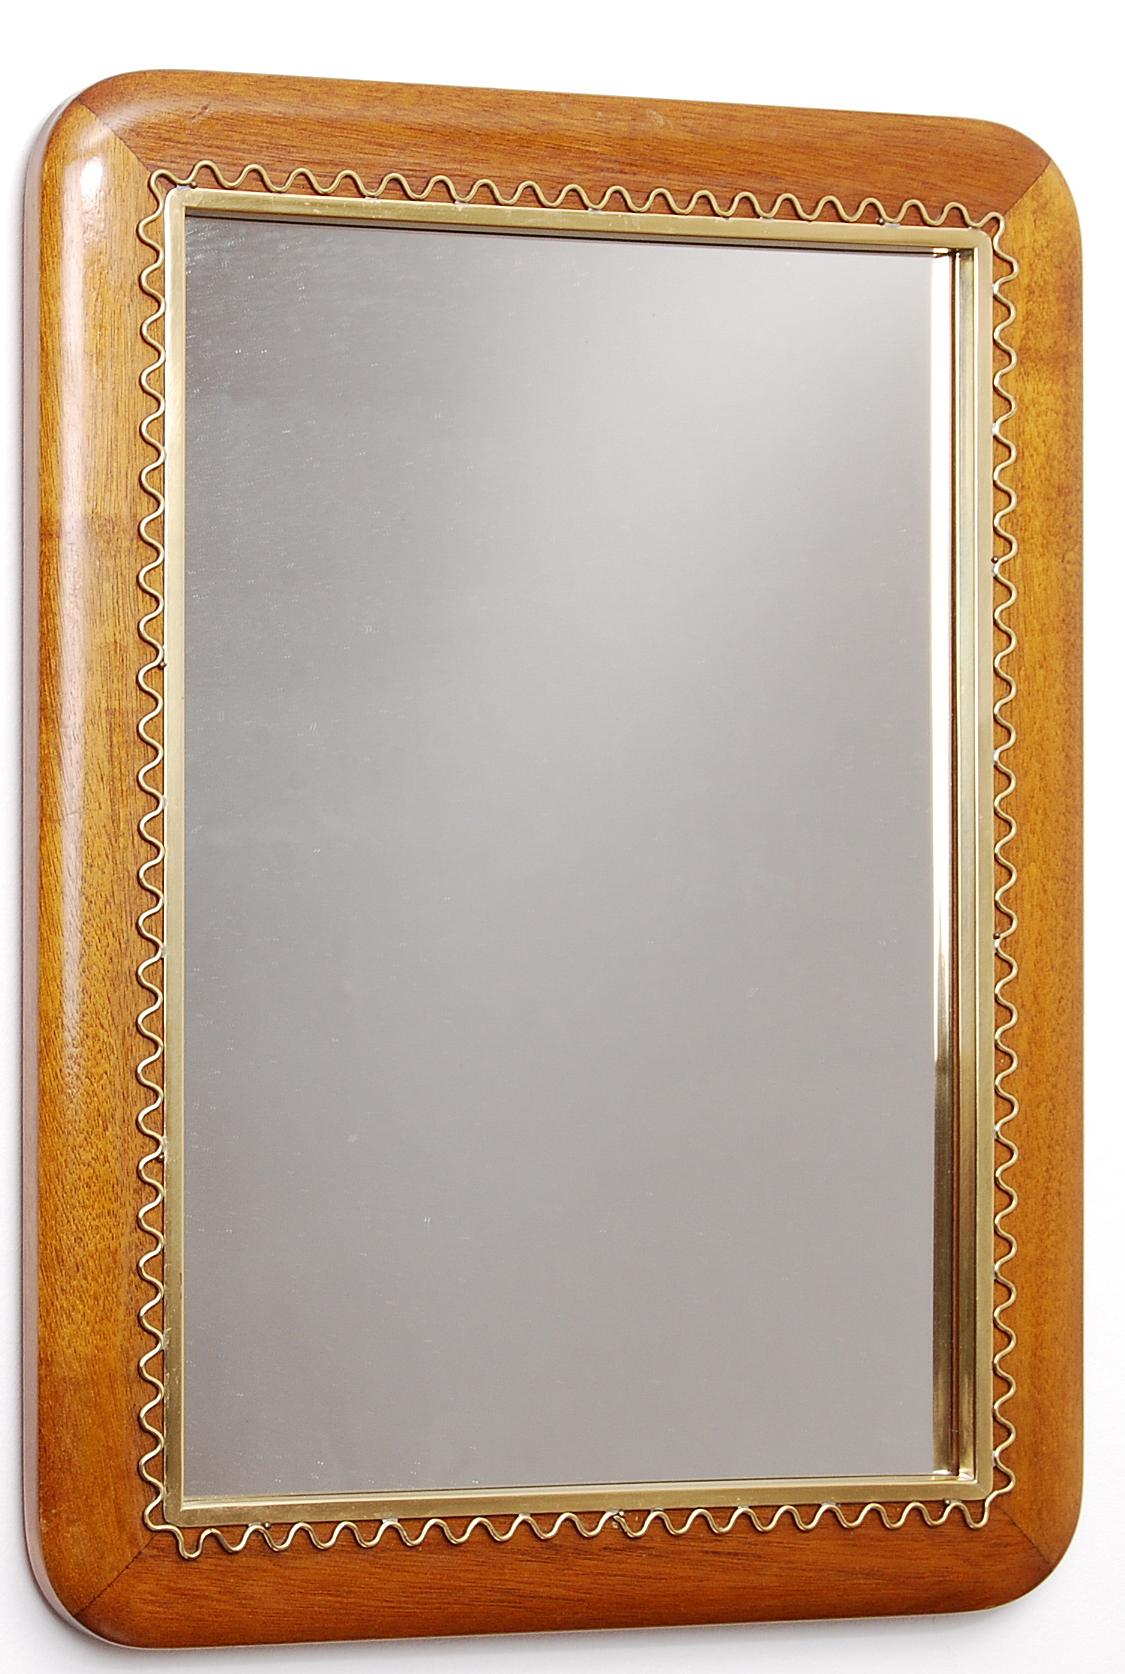 A mirror for table or wall in brass and stained oak. Designed by Josef Frank for Firma Svenskt Tenn.
   